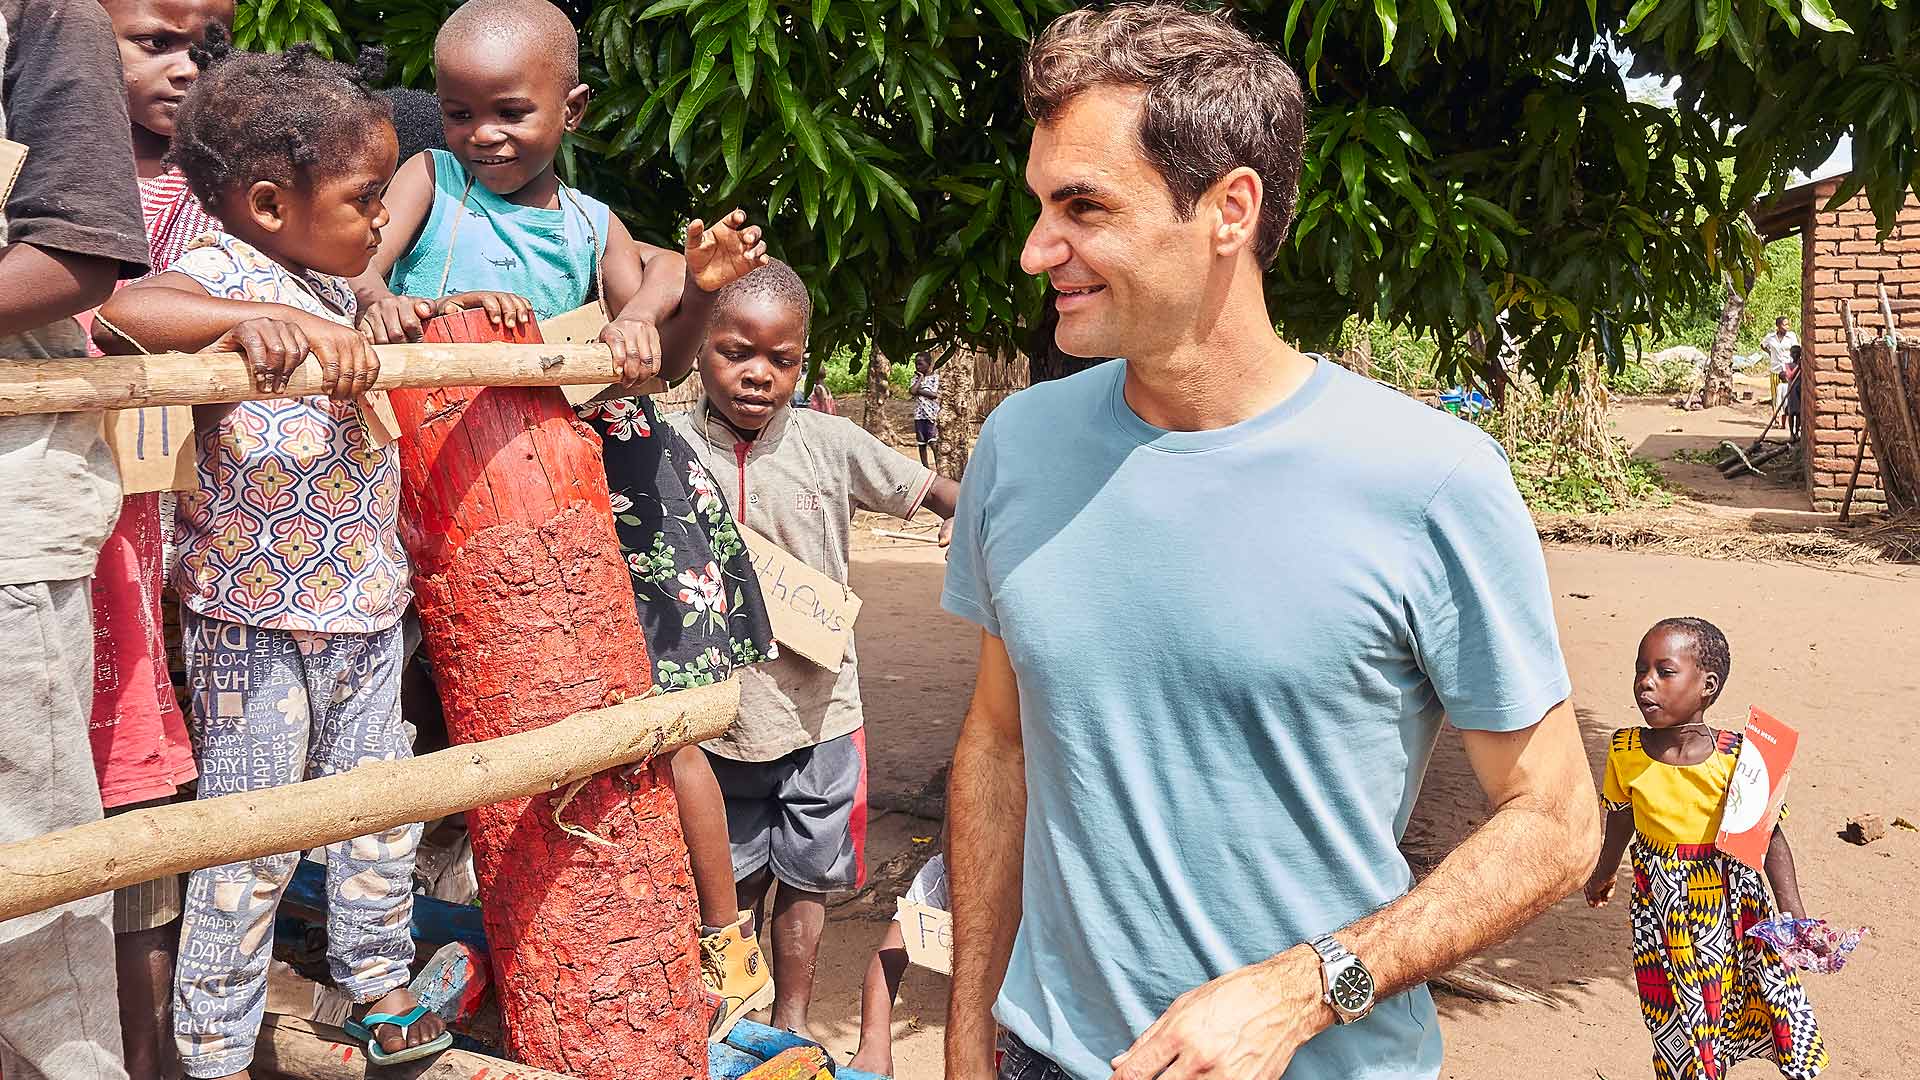 Federer On Foundation's 20th Anniversary: 'Incredibly Exciting & Fulfilling Journey'